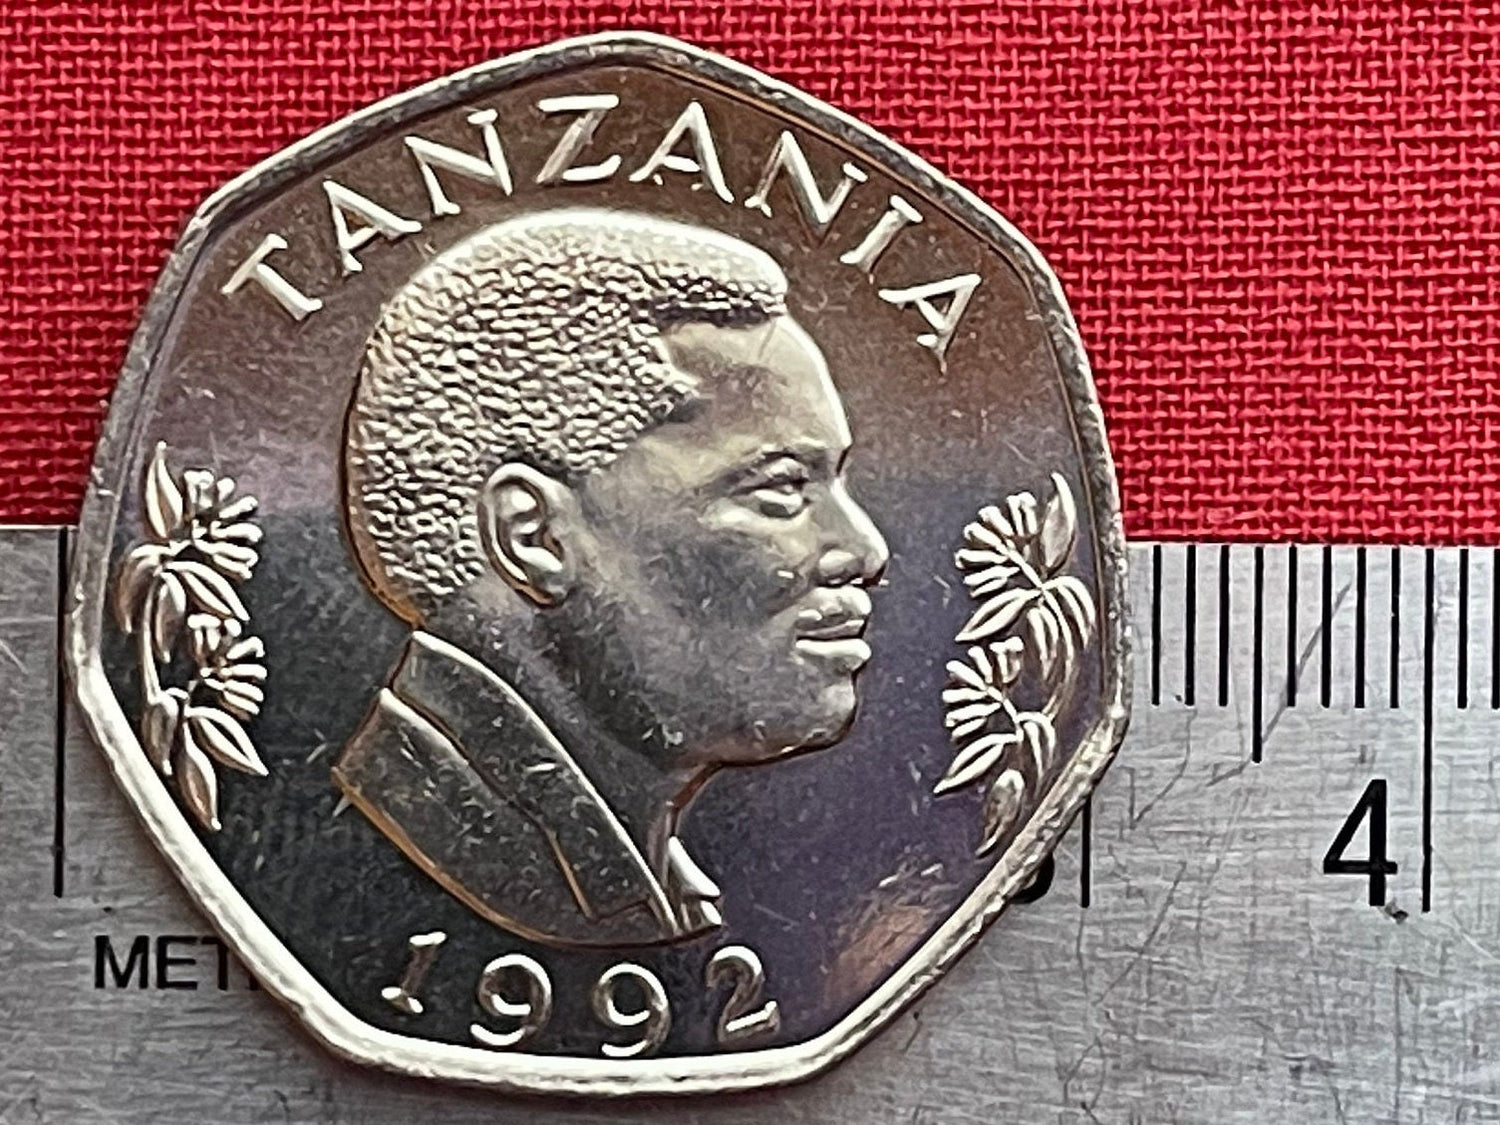 Elephant Mother and Baby & President Mwinyi 20 Shilingi Tanzania Authentic Coin Money for Jewelry and (Elephant Calf) 1992 (Heptagonal)